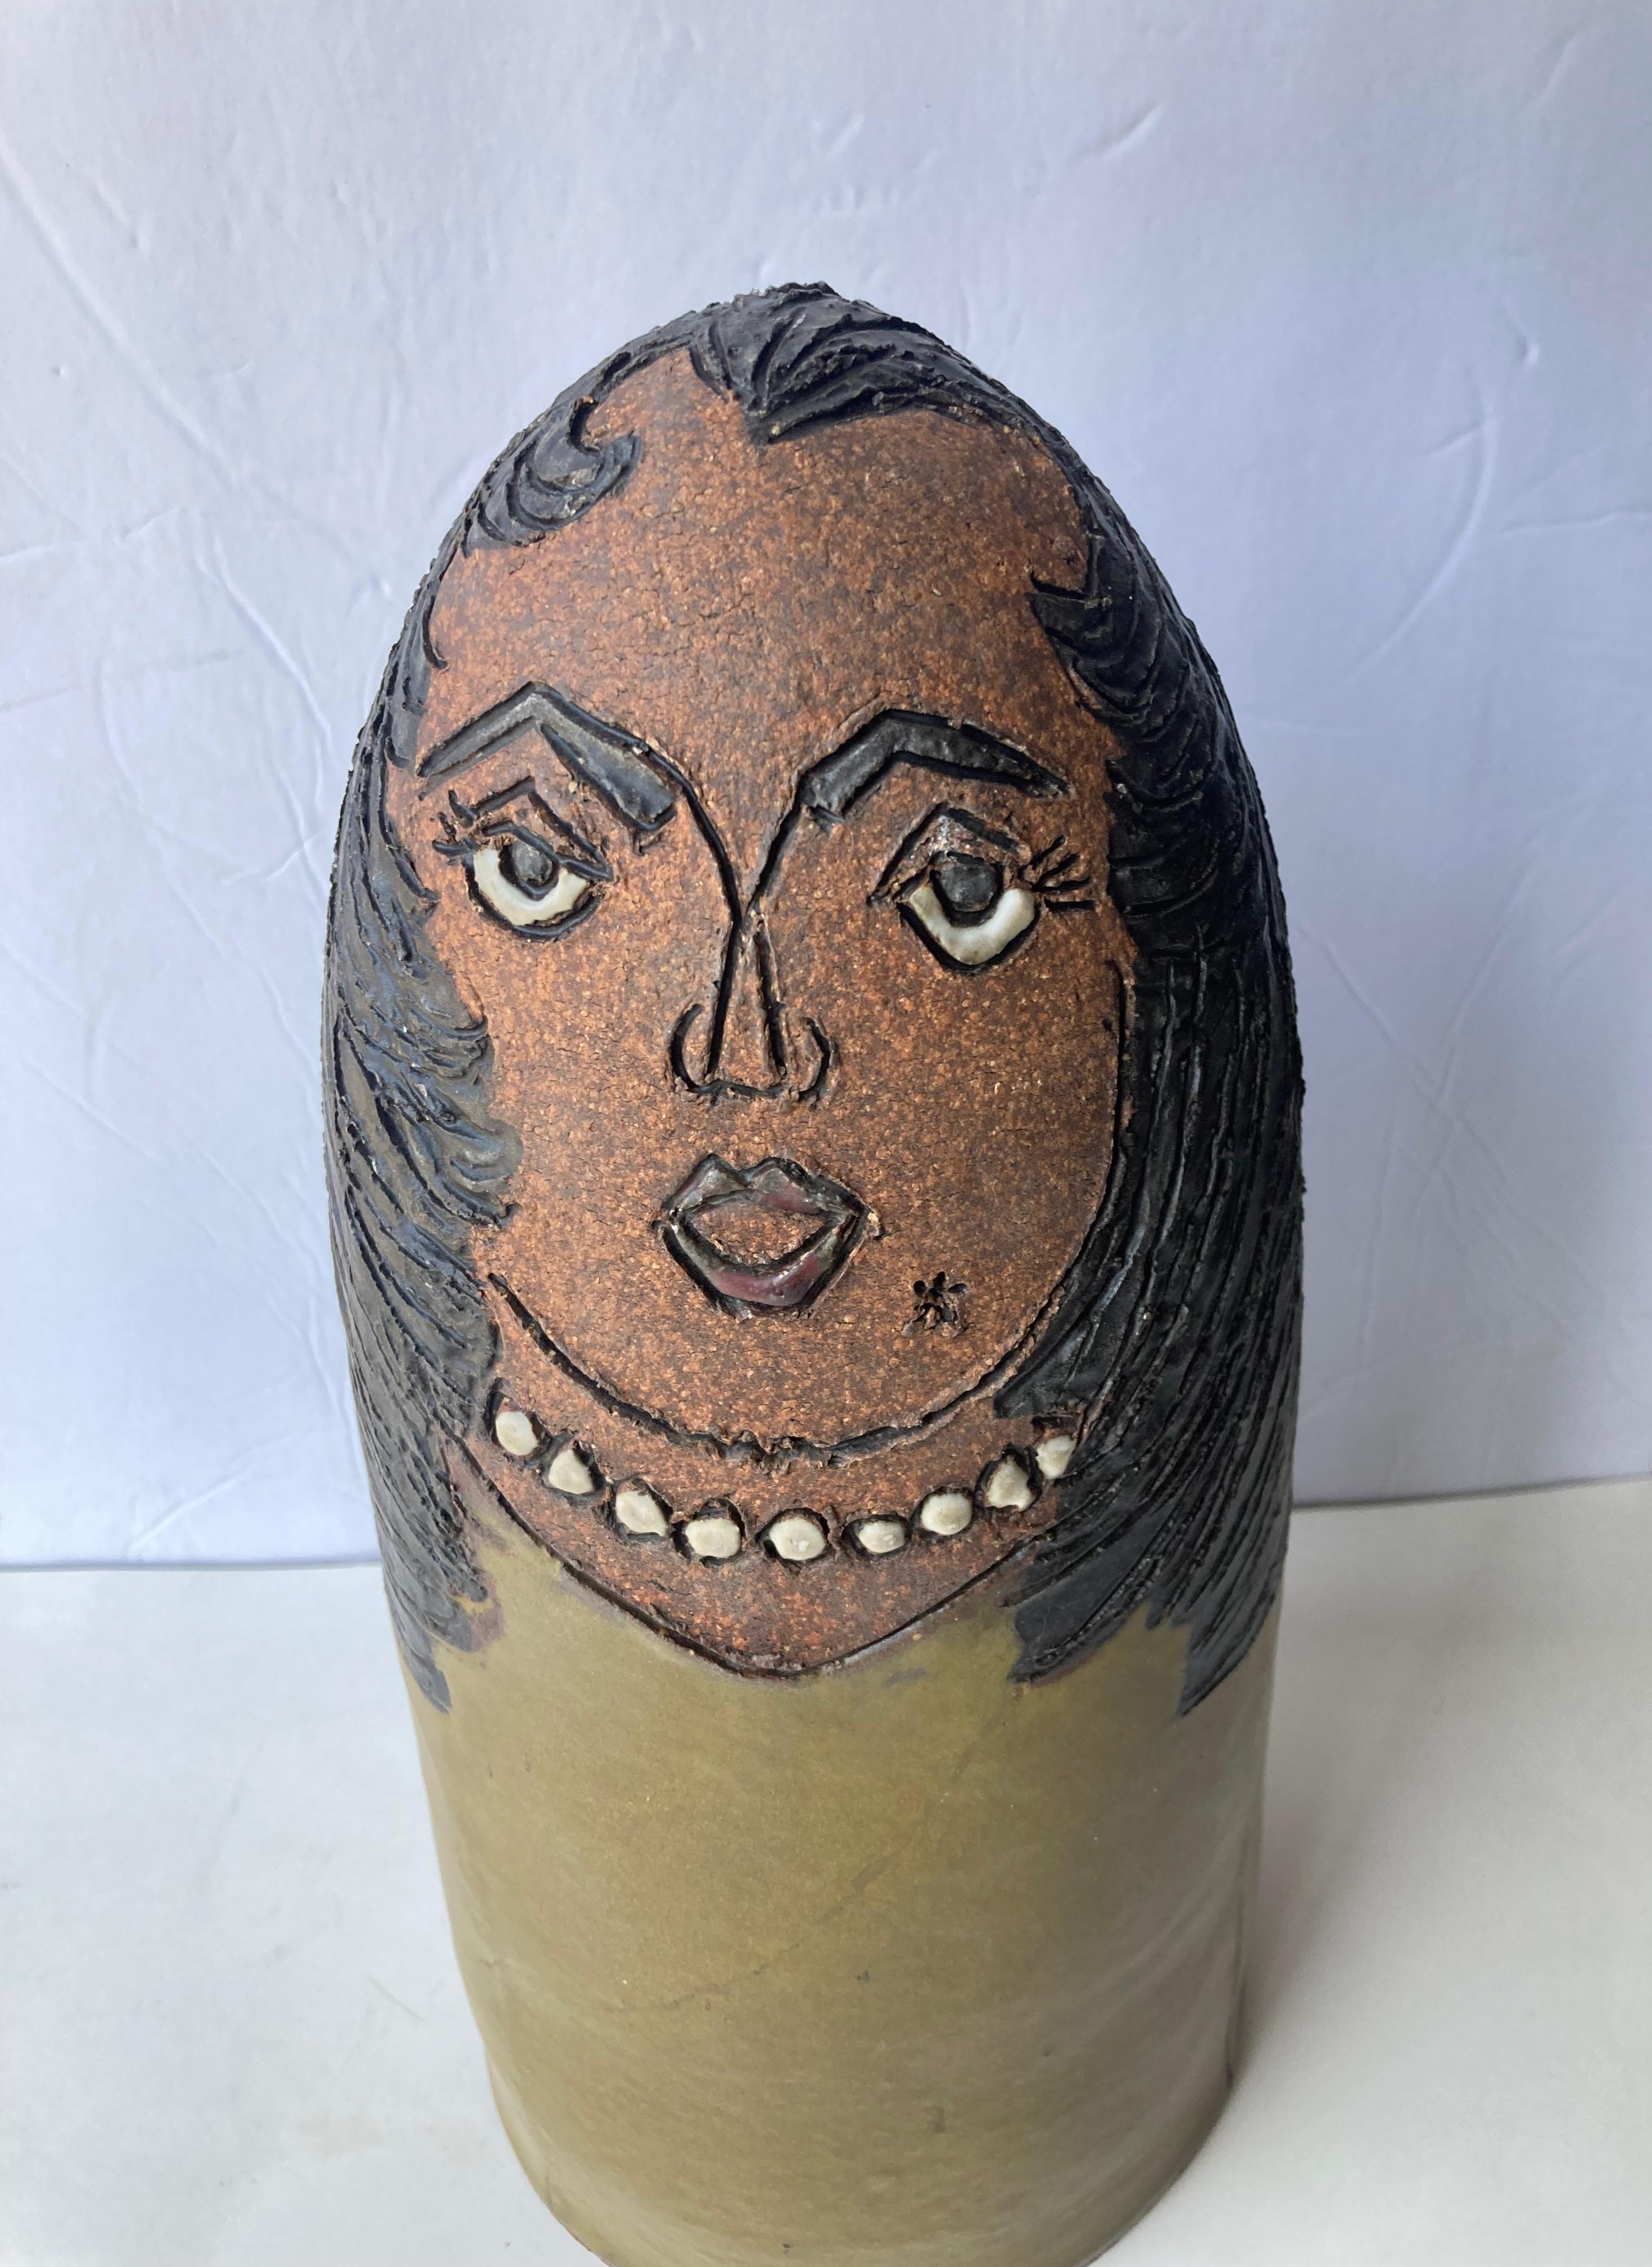 This is a rare ceramic /pottery sculpture / door stopper made by the very well known artist Raul Coronel, signed on bottom side. Original sold as door stopper but was used and added as sculpture decorations as art.